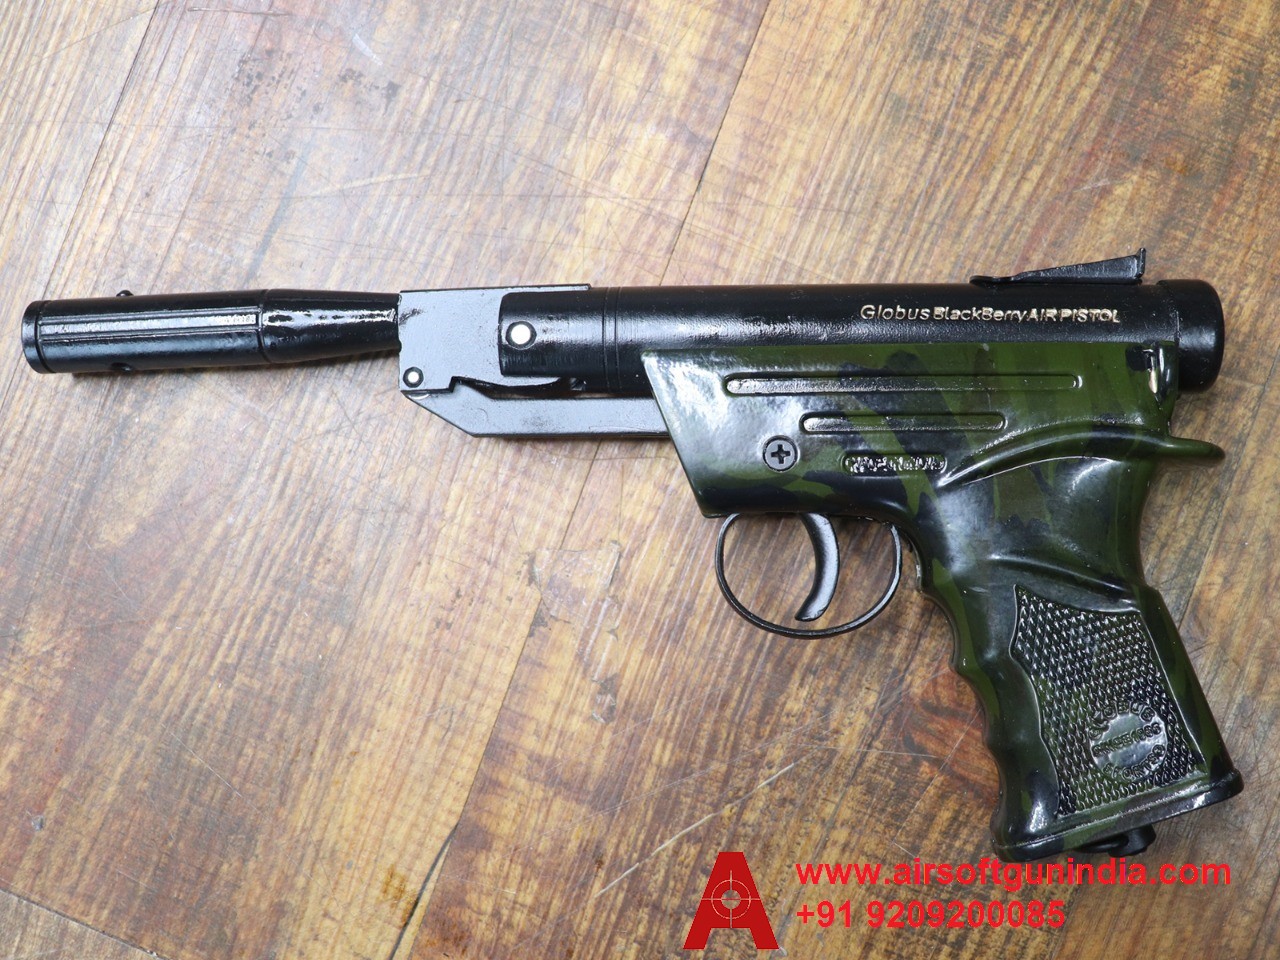 GLOBUS Blackberry Army .177 Indian Air Pistol By Airsoft Gun India